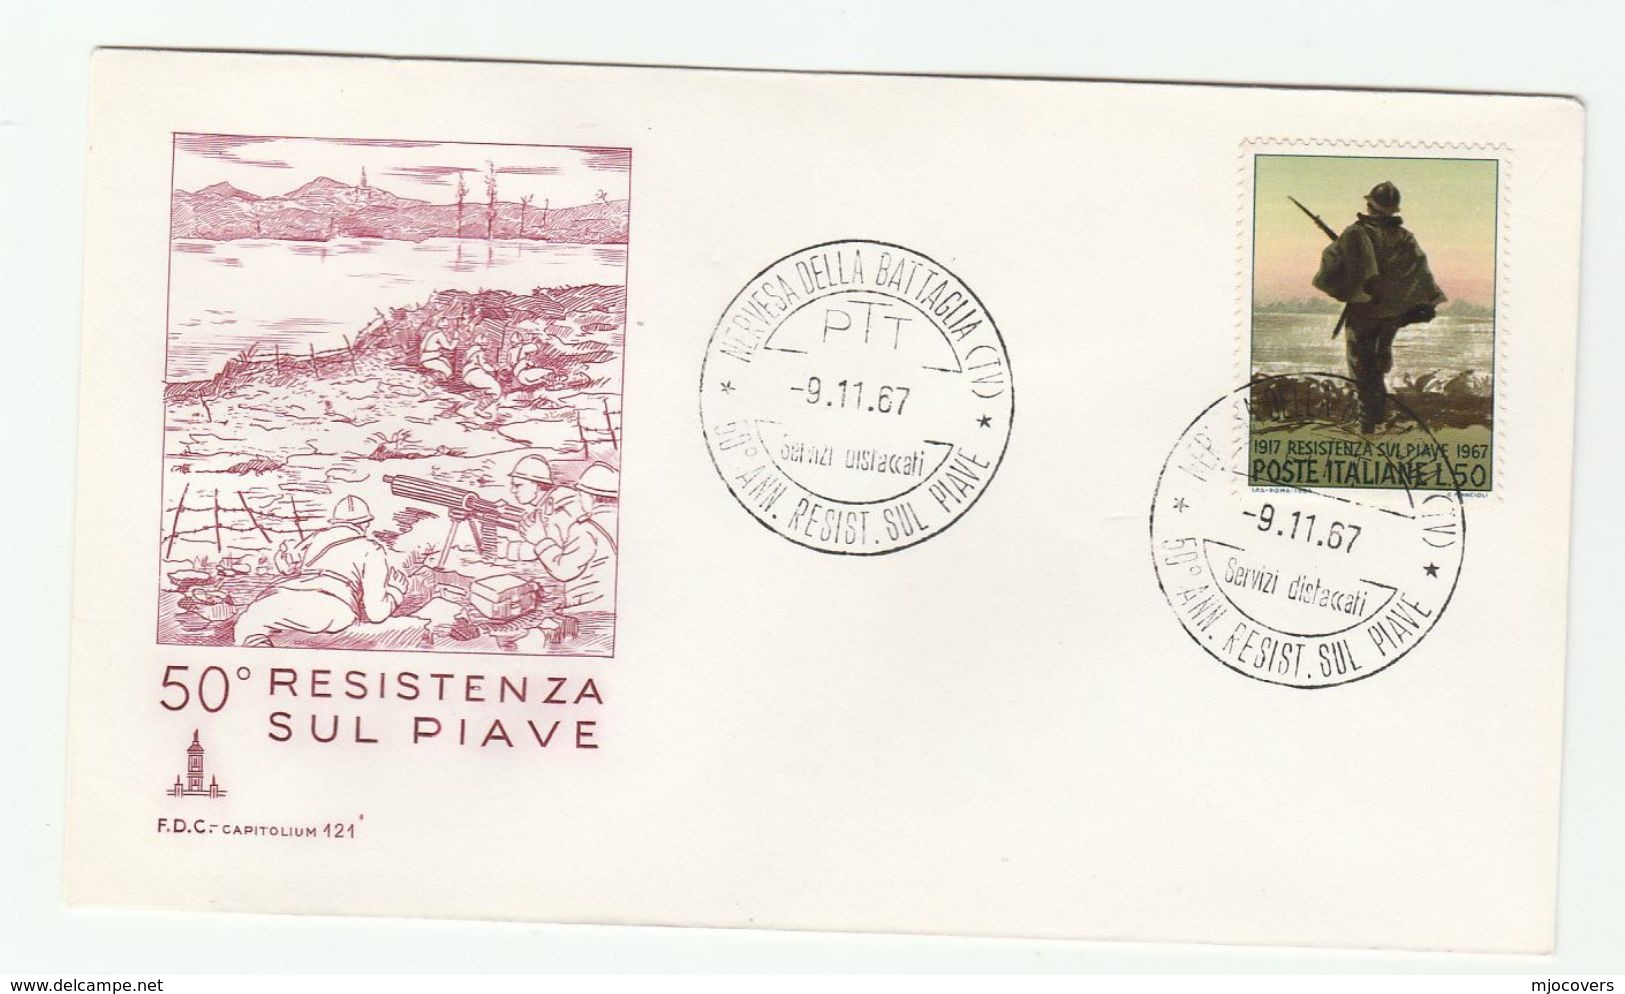 1967 Treviso  ITALY FDC WWI RESISTENZE Sul PIAVE 50th Anniiv Stamps Cover Military Army Forces - WW1